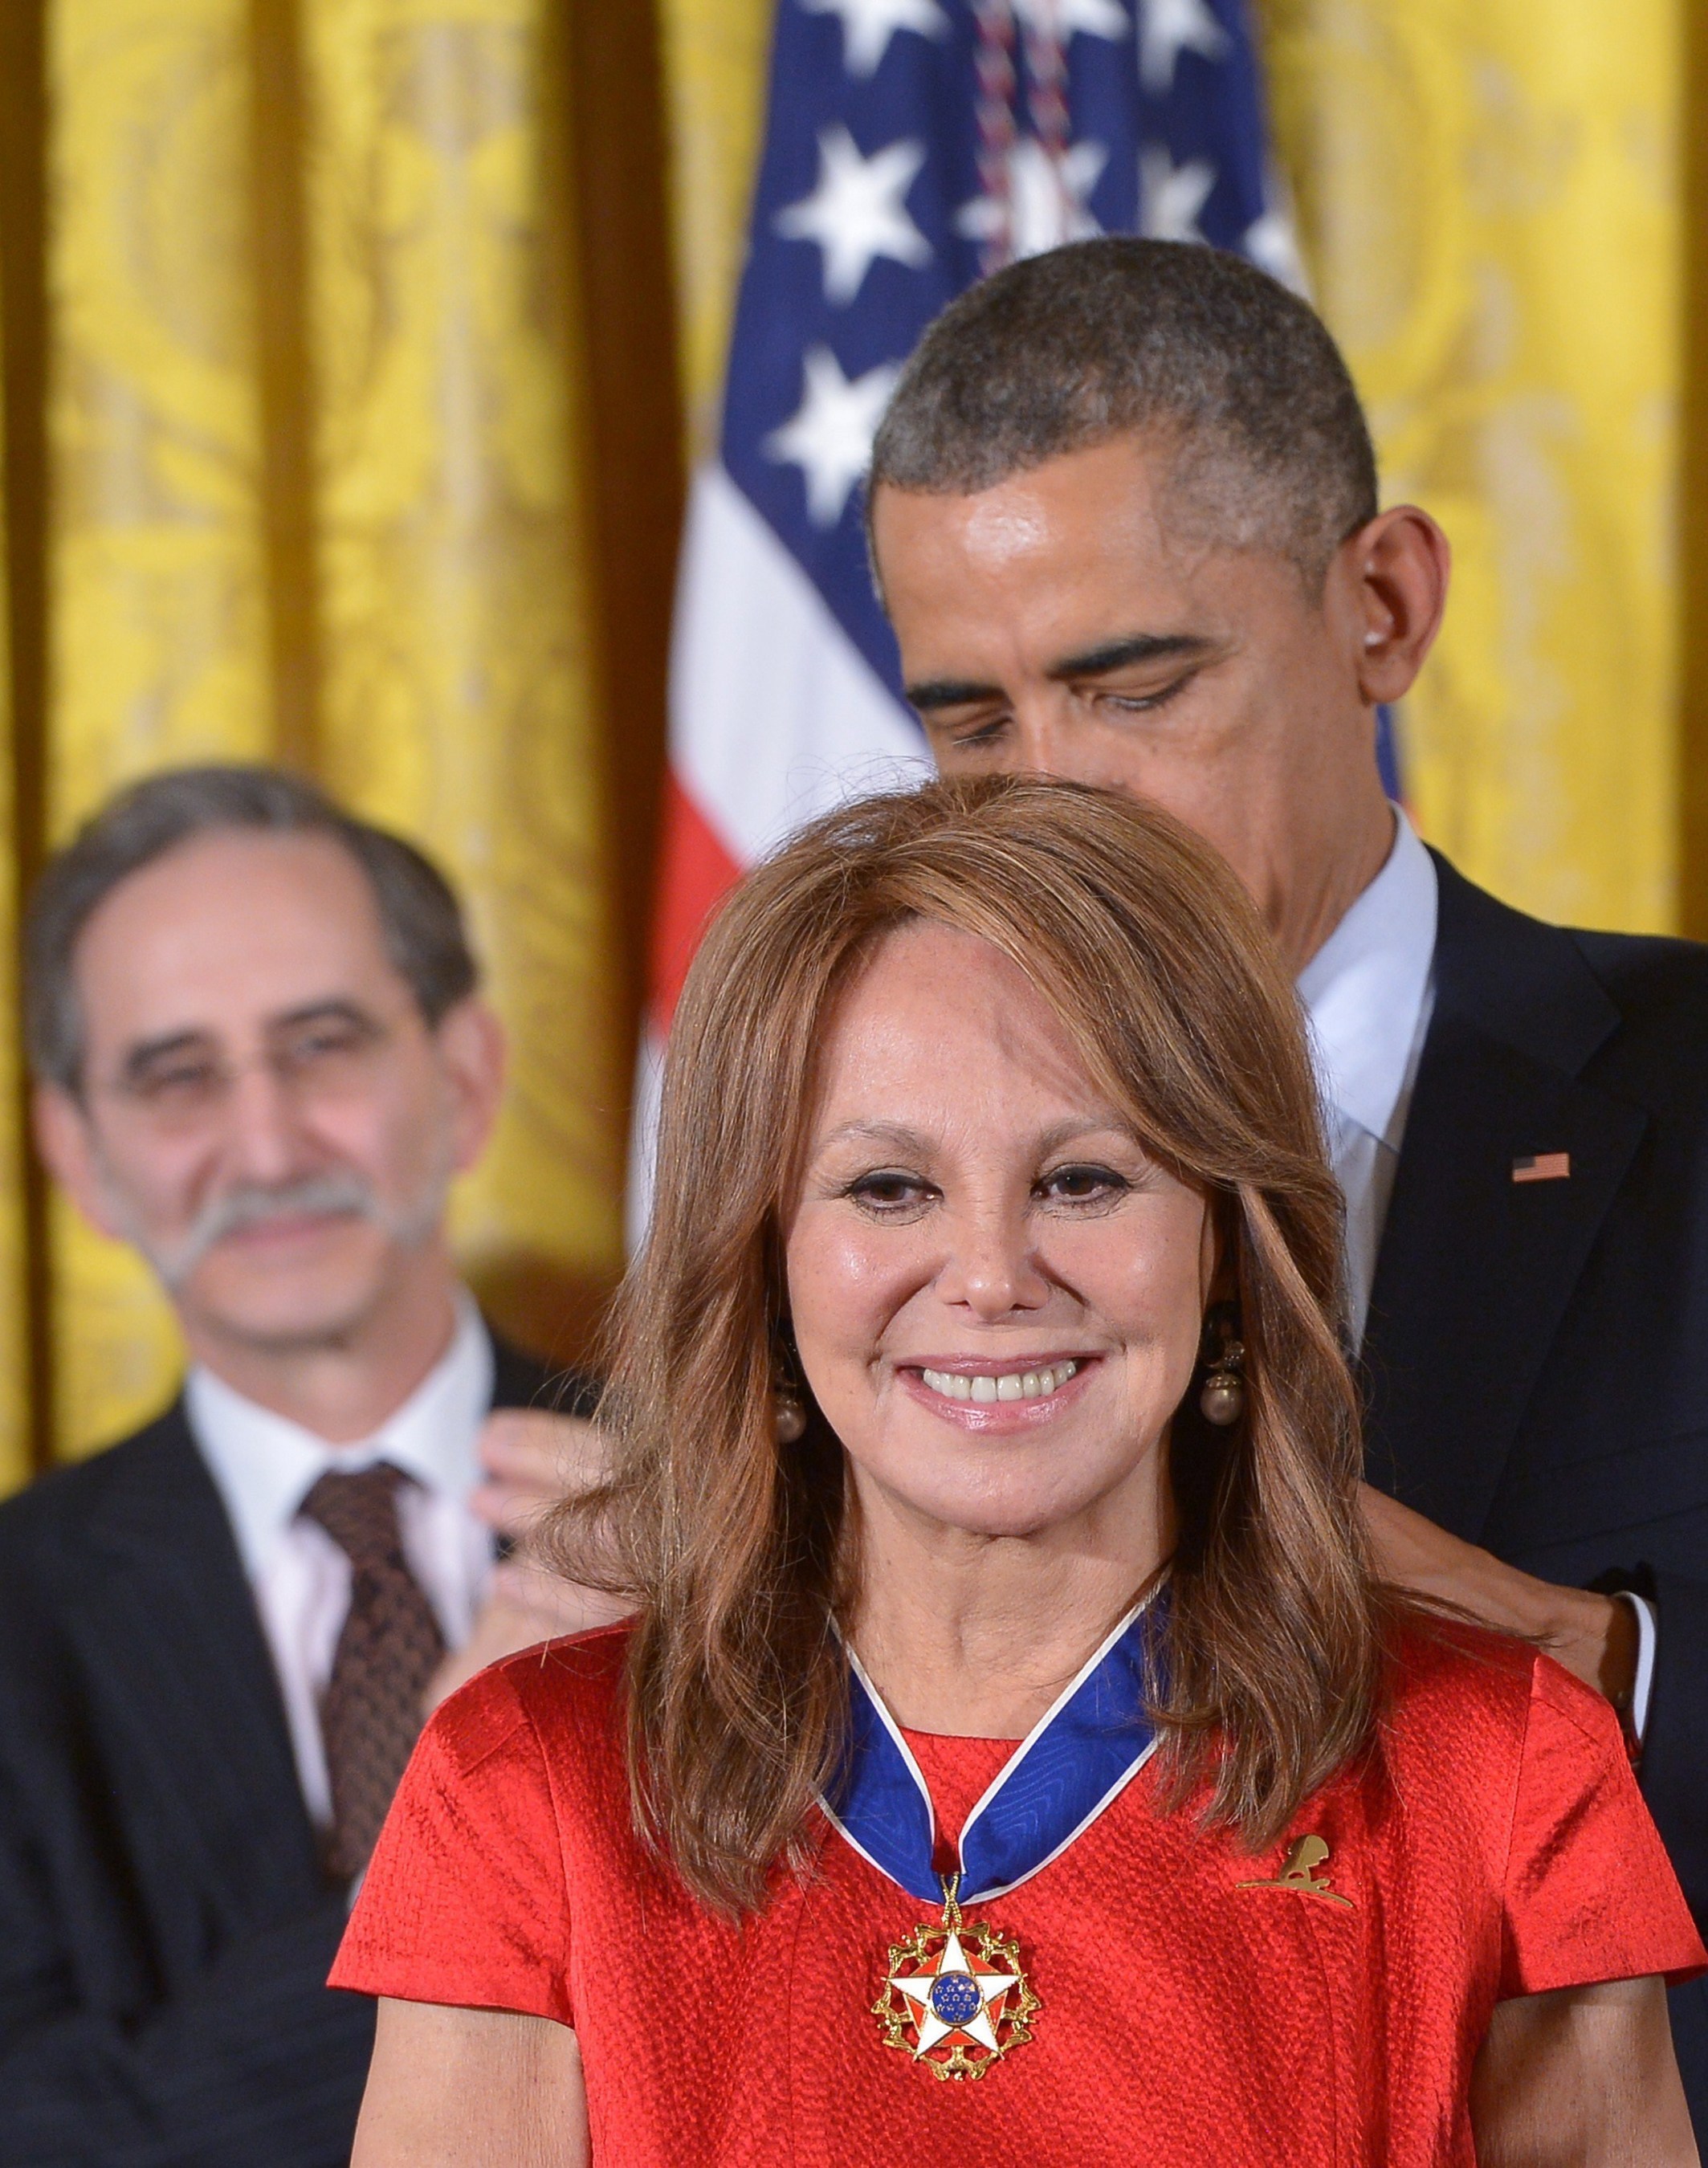 US President Barack Obama presents the Medal of Freedom to actress and St. Jude National Outreach Director Marlo Thomas during a ceremony in the East Room of the White House on November 24, 2014 in Washington, DC. The Medal of Freedom is the country's highest civilian honor. Photo Credit: AFP PHOTO/Mandel NGAN